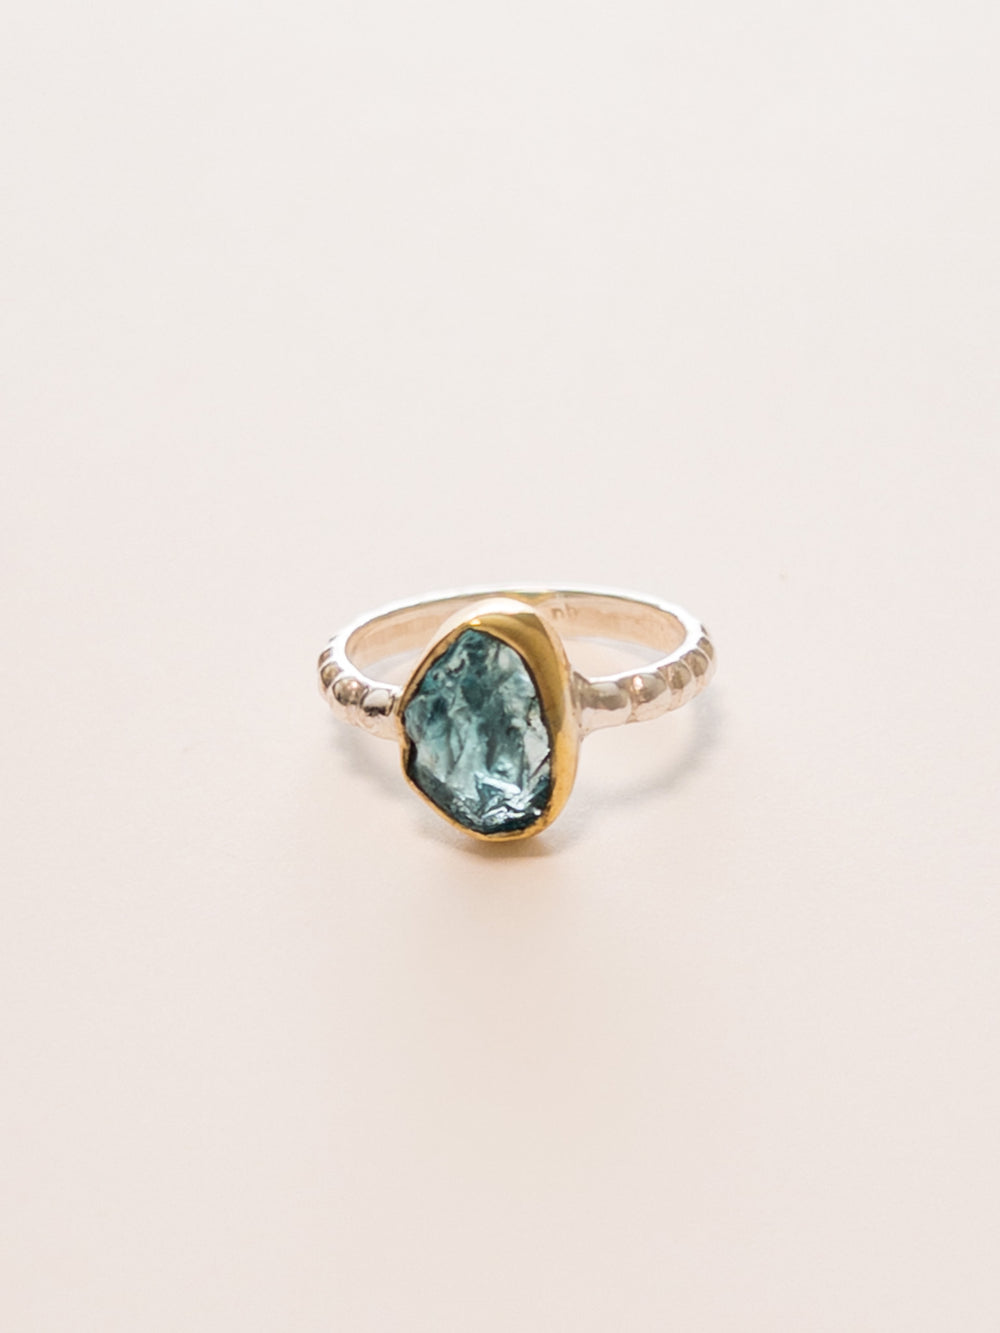 Tranquility nh ring - rough apatite